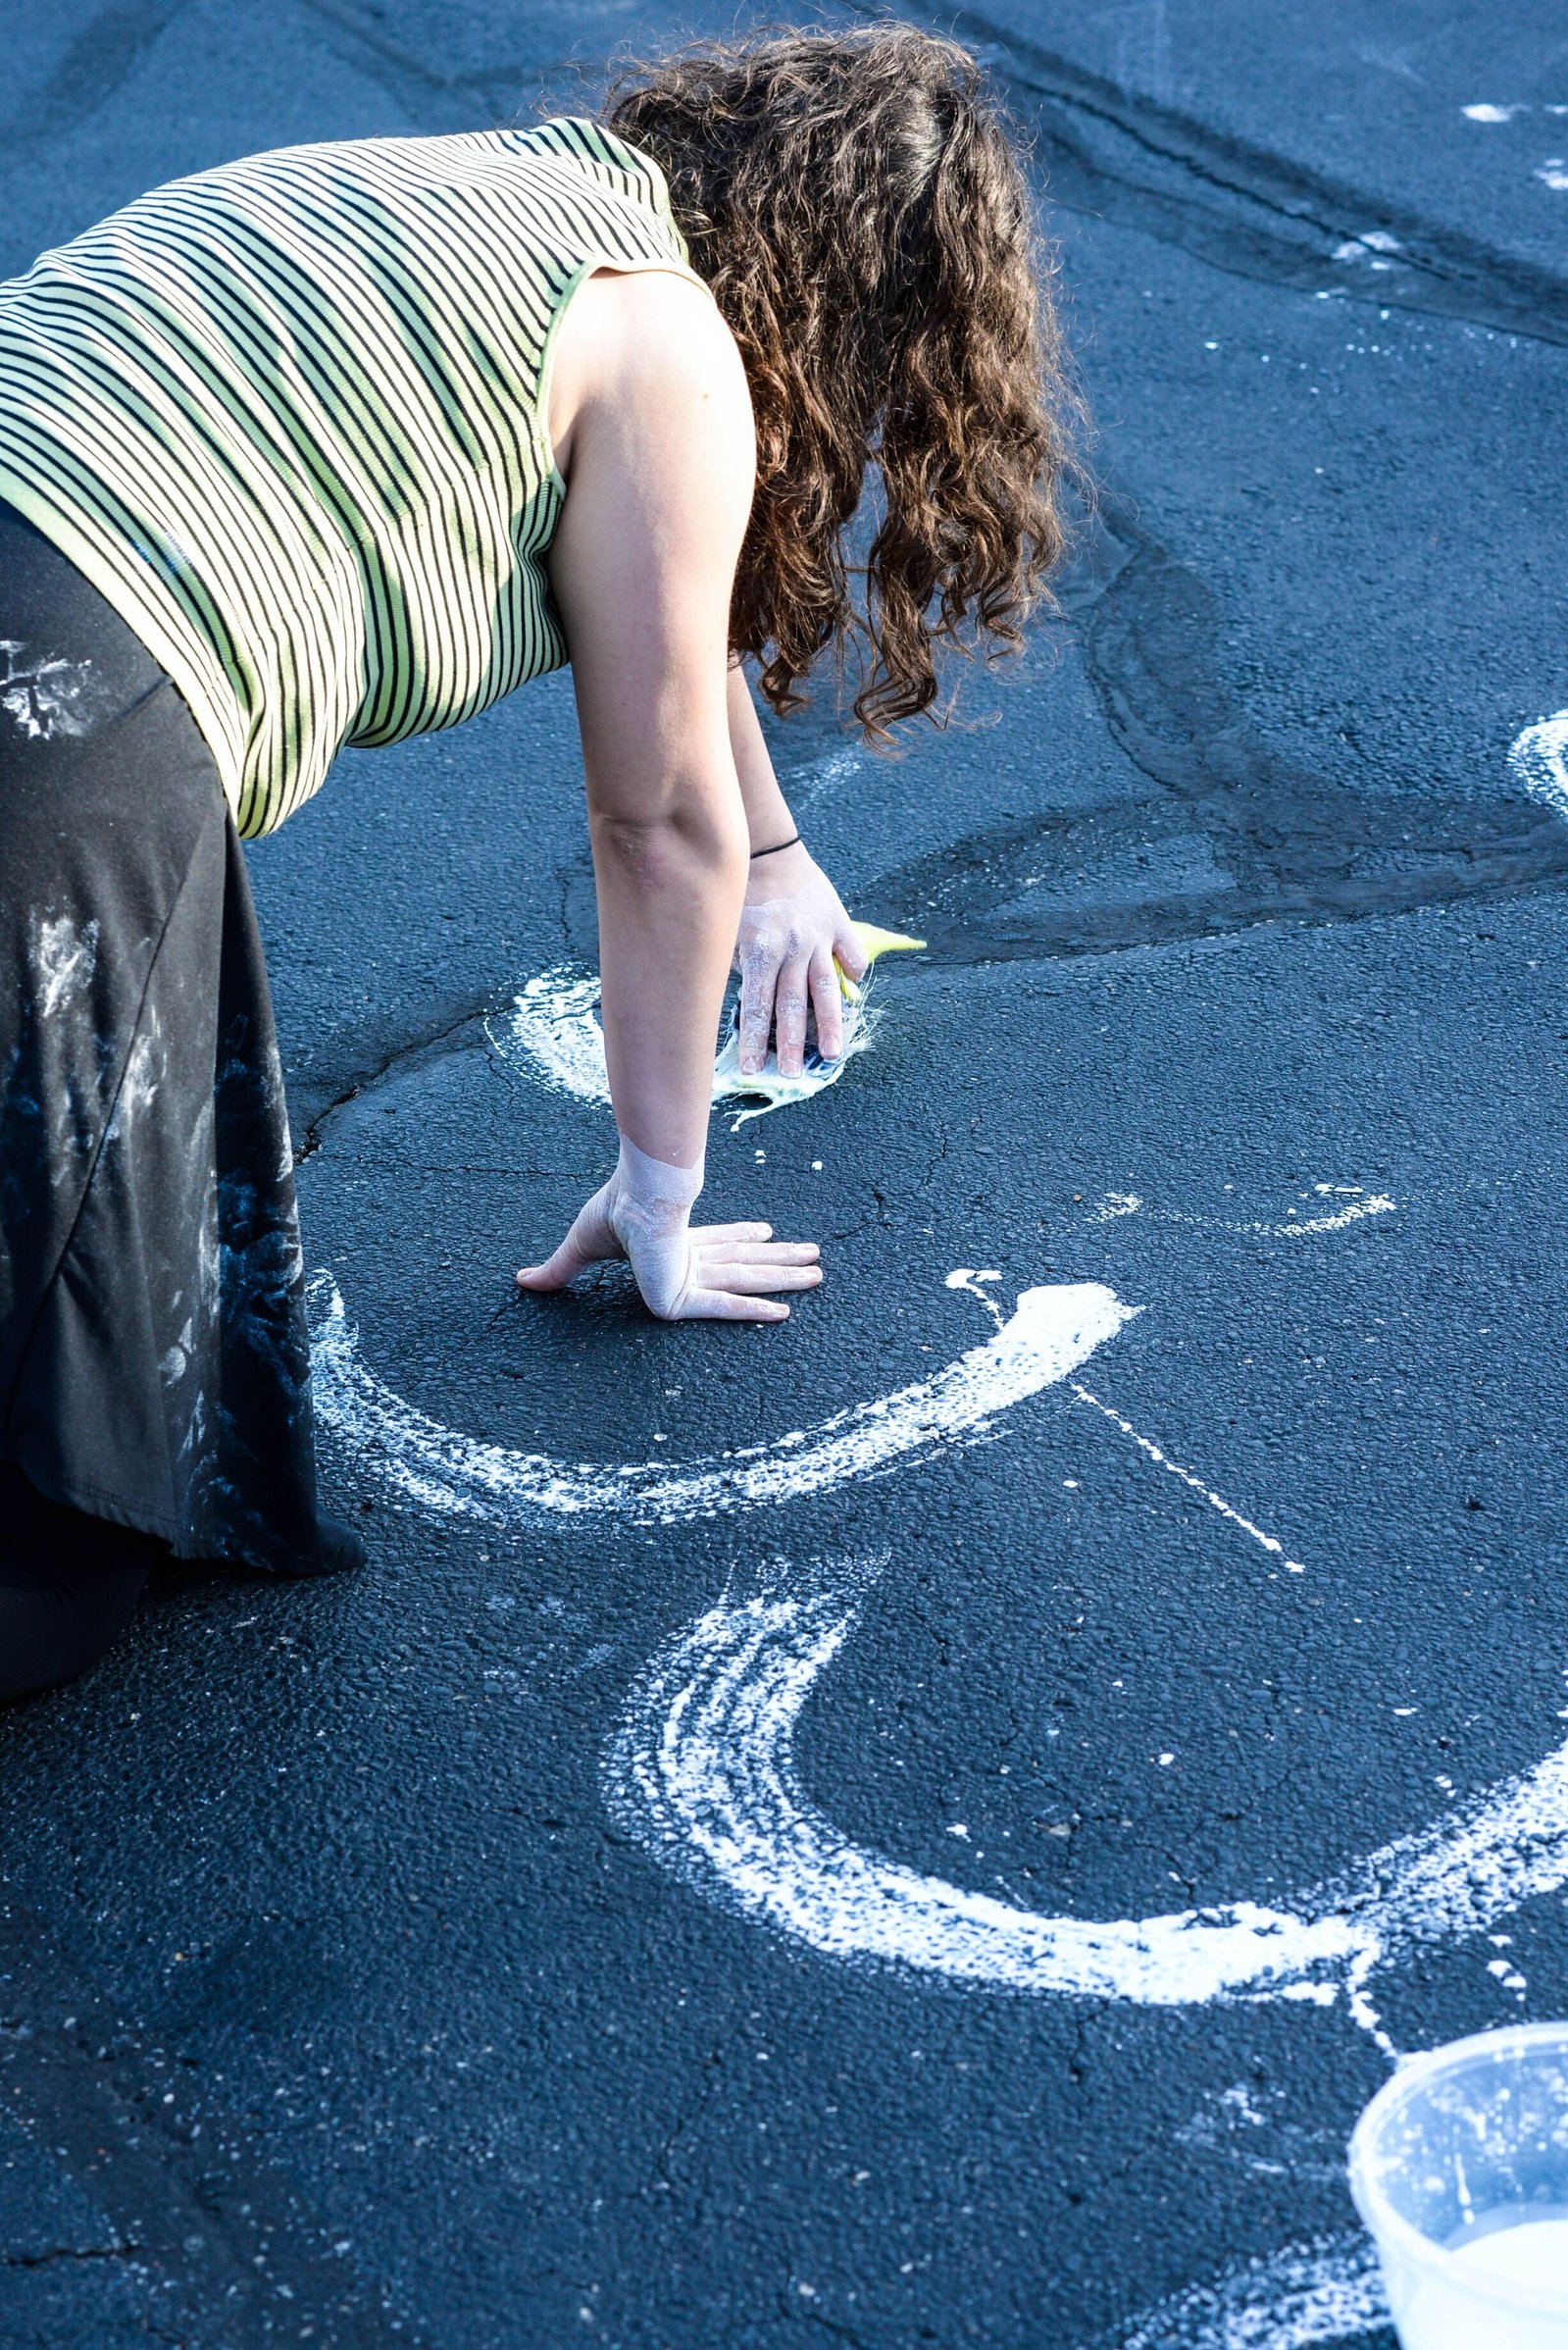 A person of light skin tone paints with their hands on dark asphalt. They are close to the ground as they make their art.